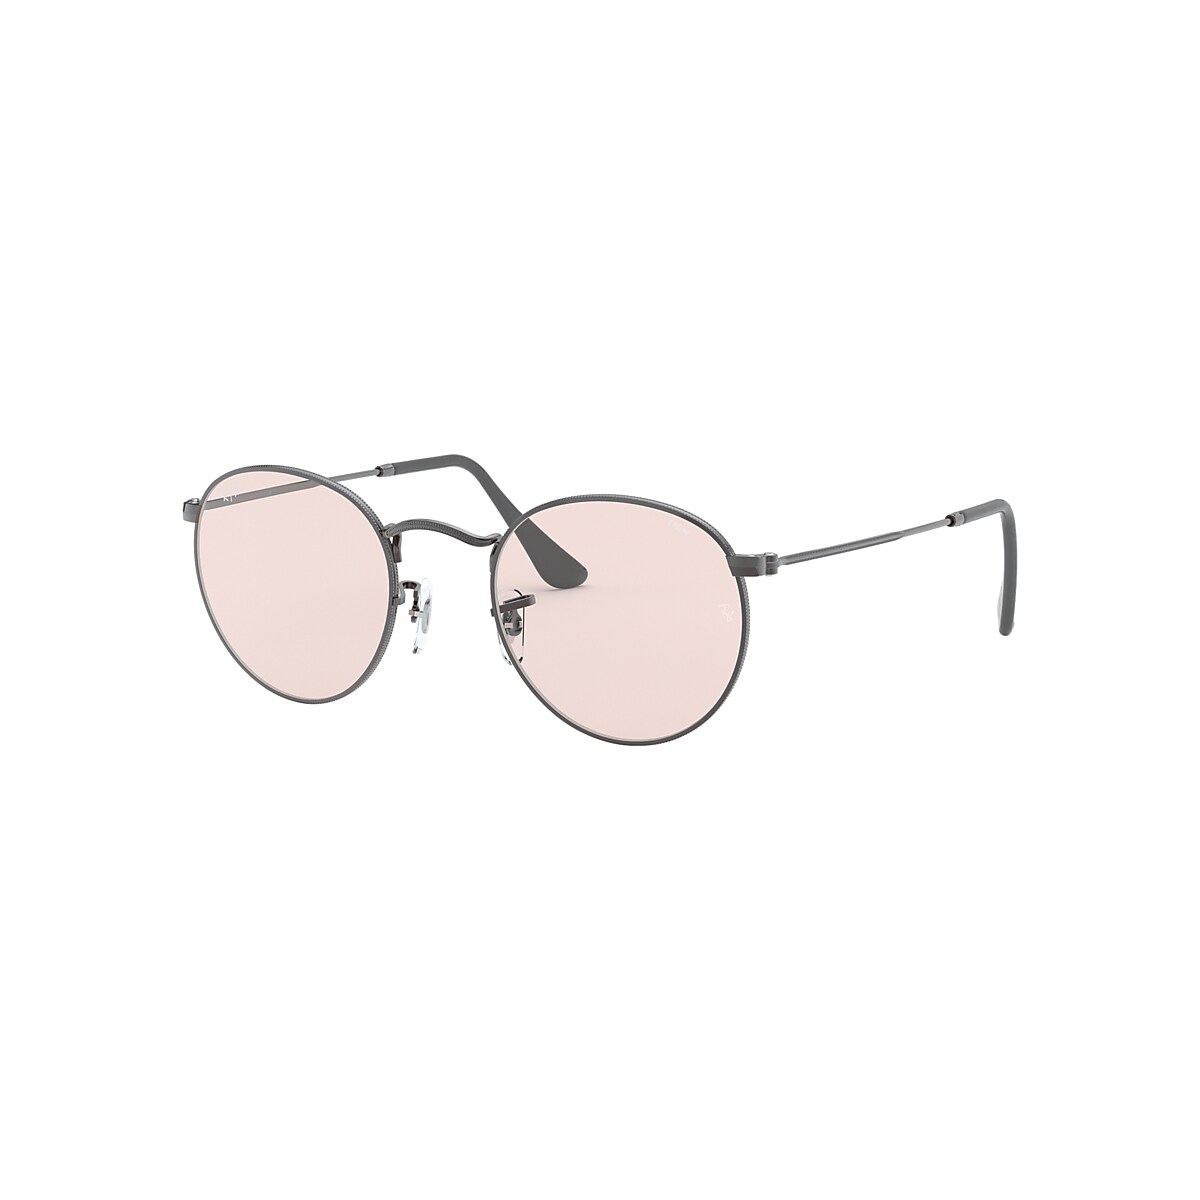 Round Solid Evolve Sunglasses in Gunmetal and Pink Photochromic 